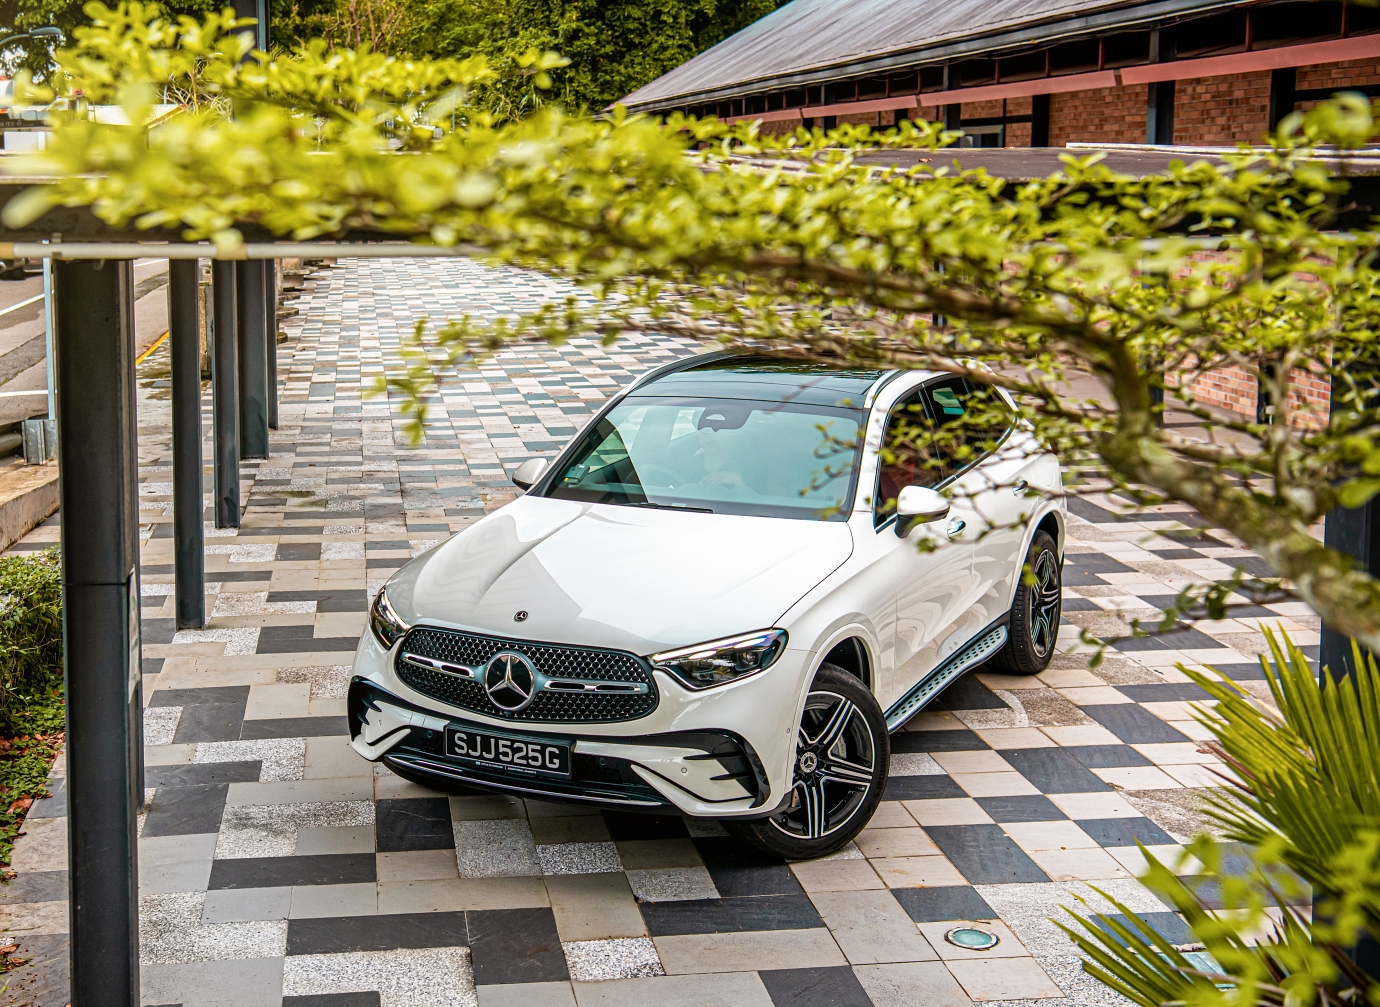 mercedes-benz, mercedes, mercedes-benz glc, glc, mercedes-benz glc-class launched in singapore : good luck charm